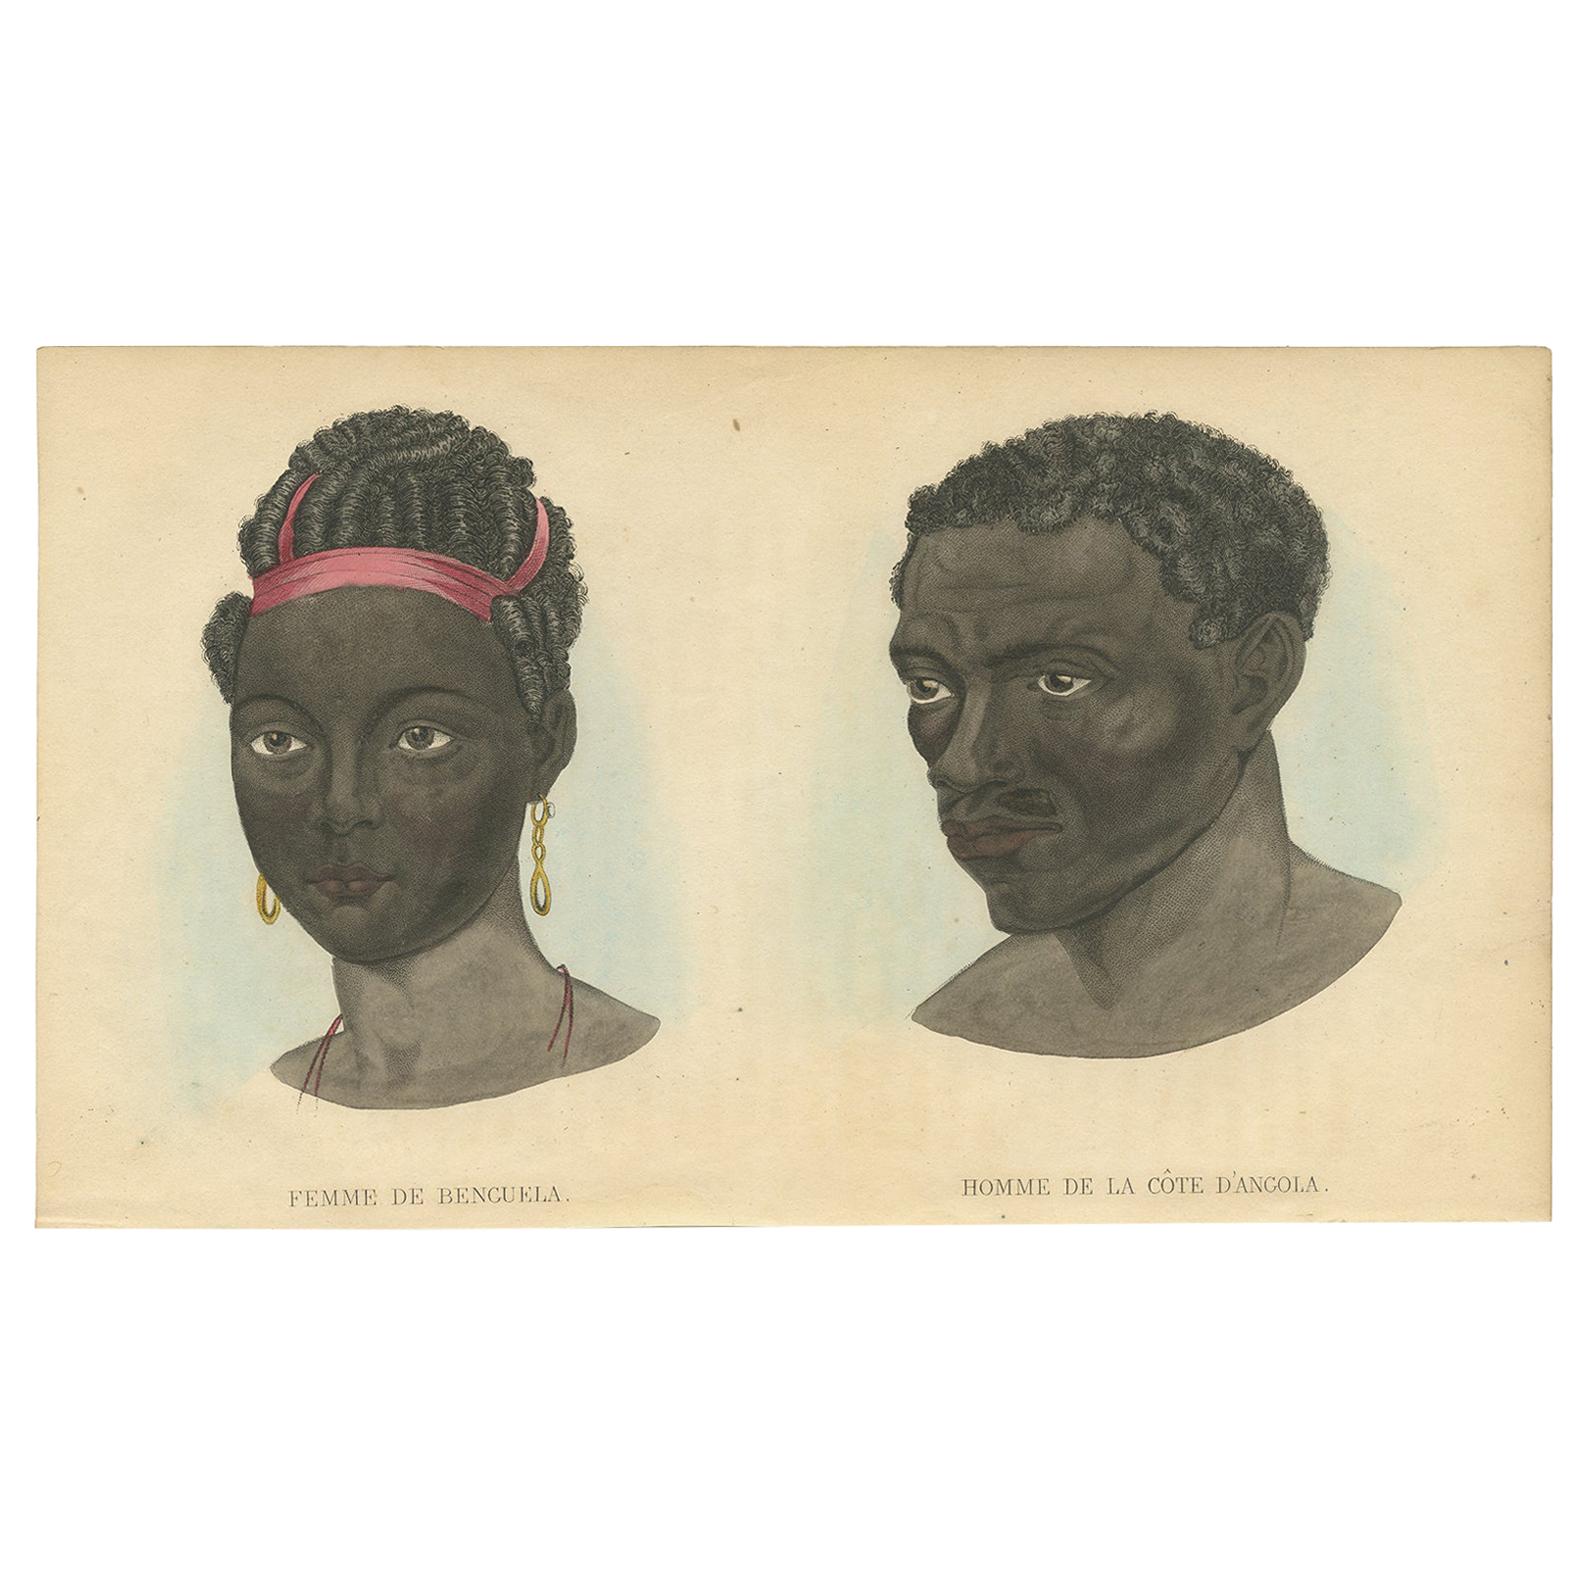 Antique Print of a Natives of Benguela and Coast of Angola by Prichard, 1843